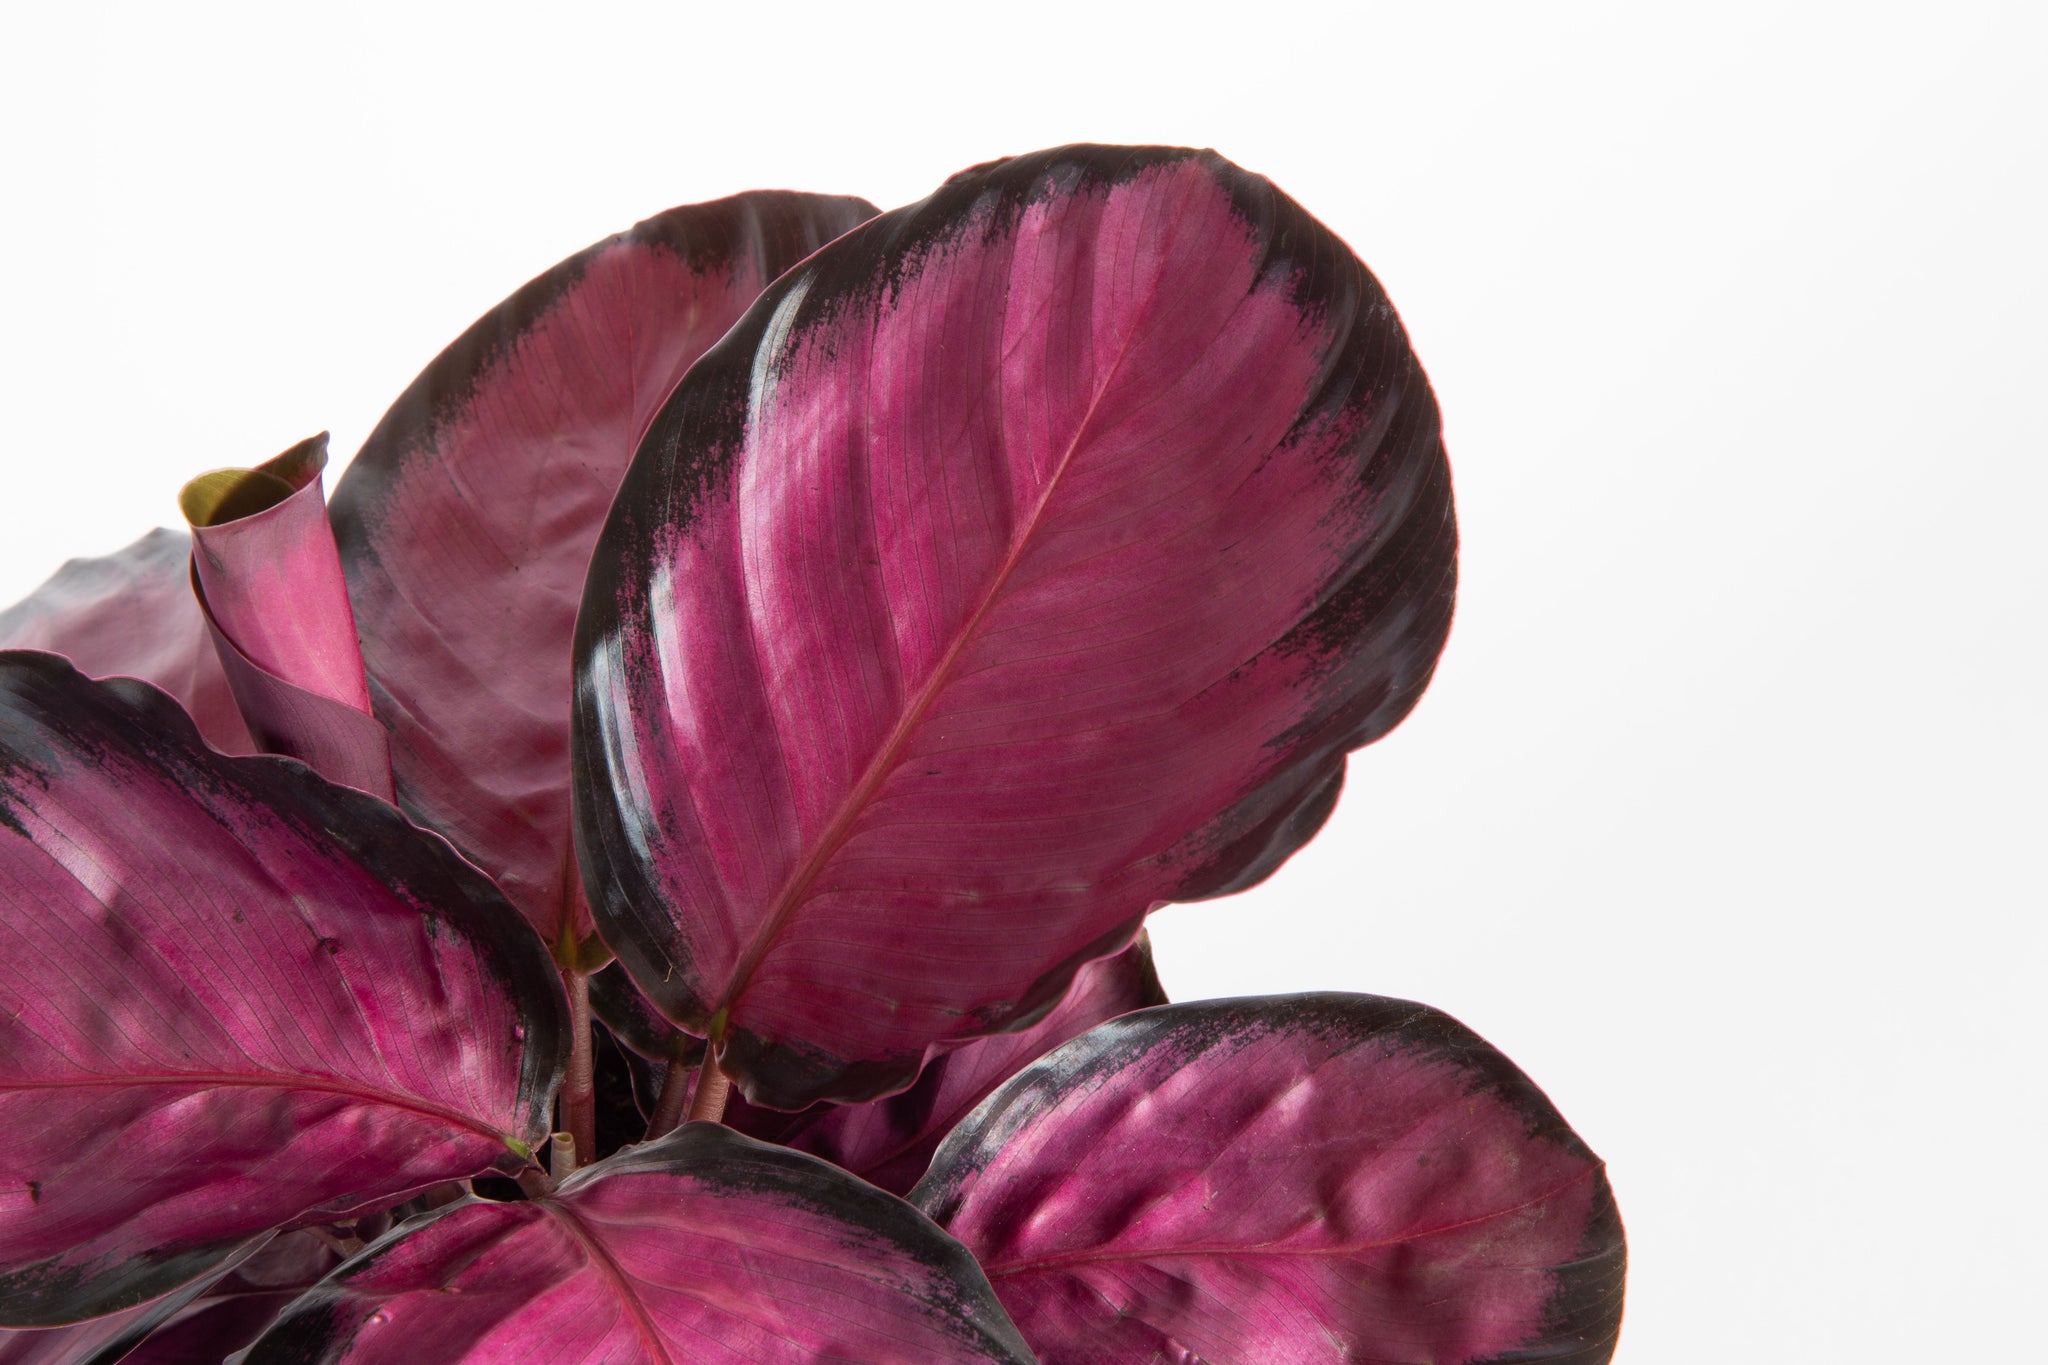 detail close up calathea pink star leaves, you can see the center is bright magenta colored and the edges of the leaves are lined in black